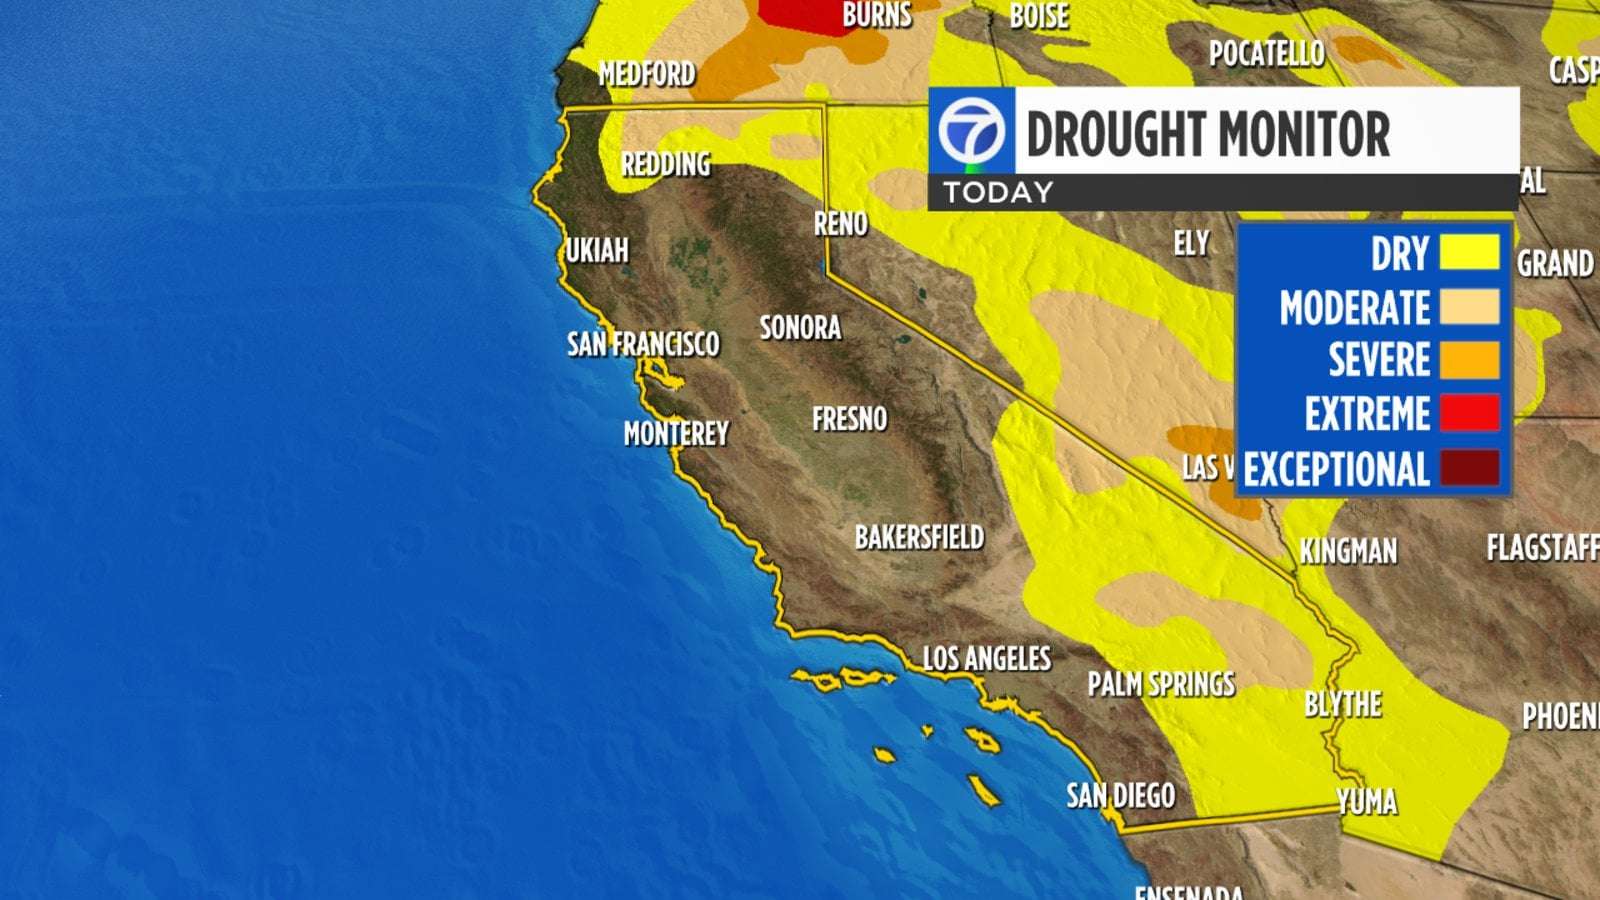 image for Less than 9% of California remains in drought conditions, new data shows